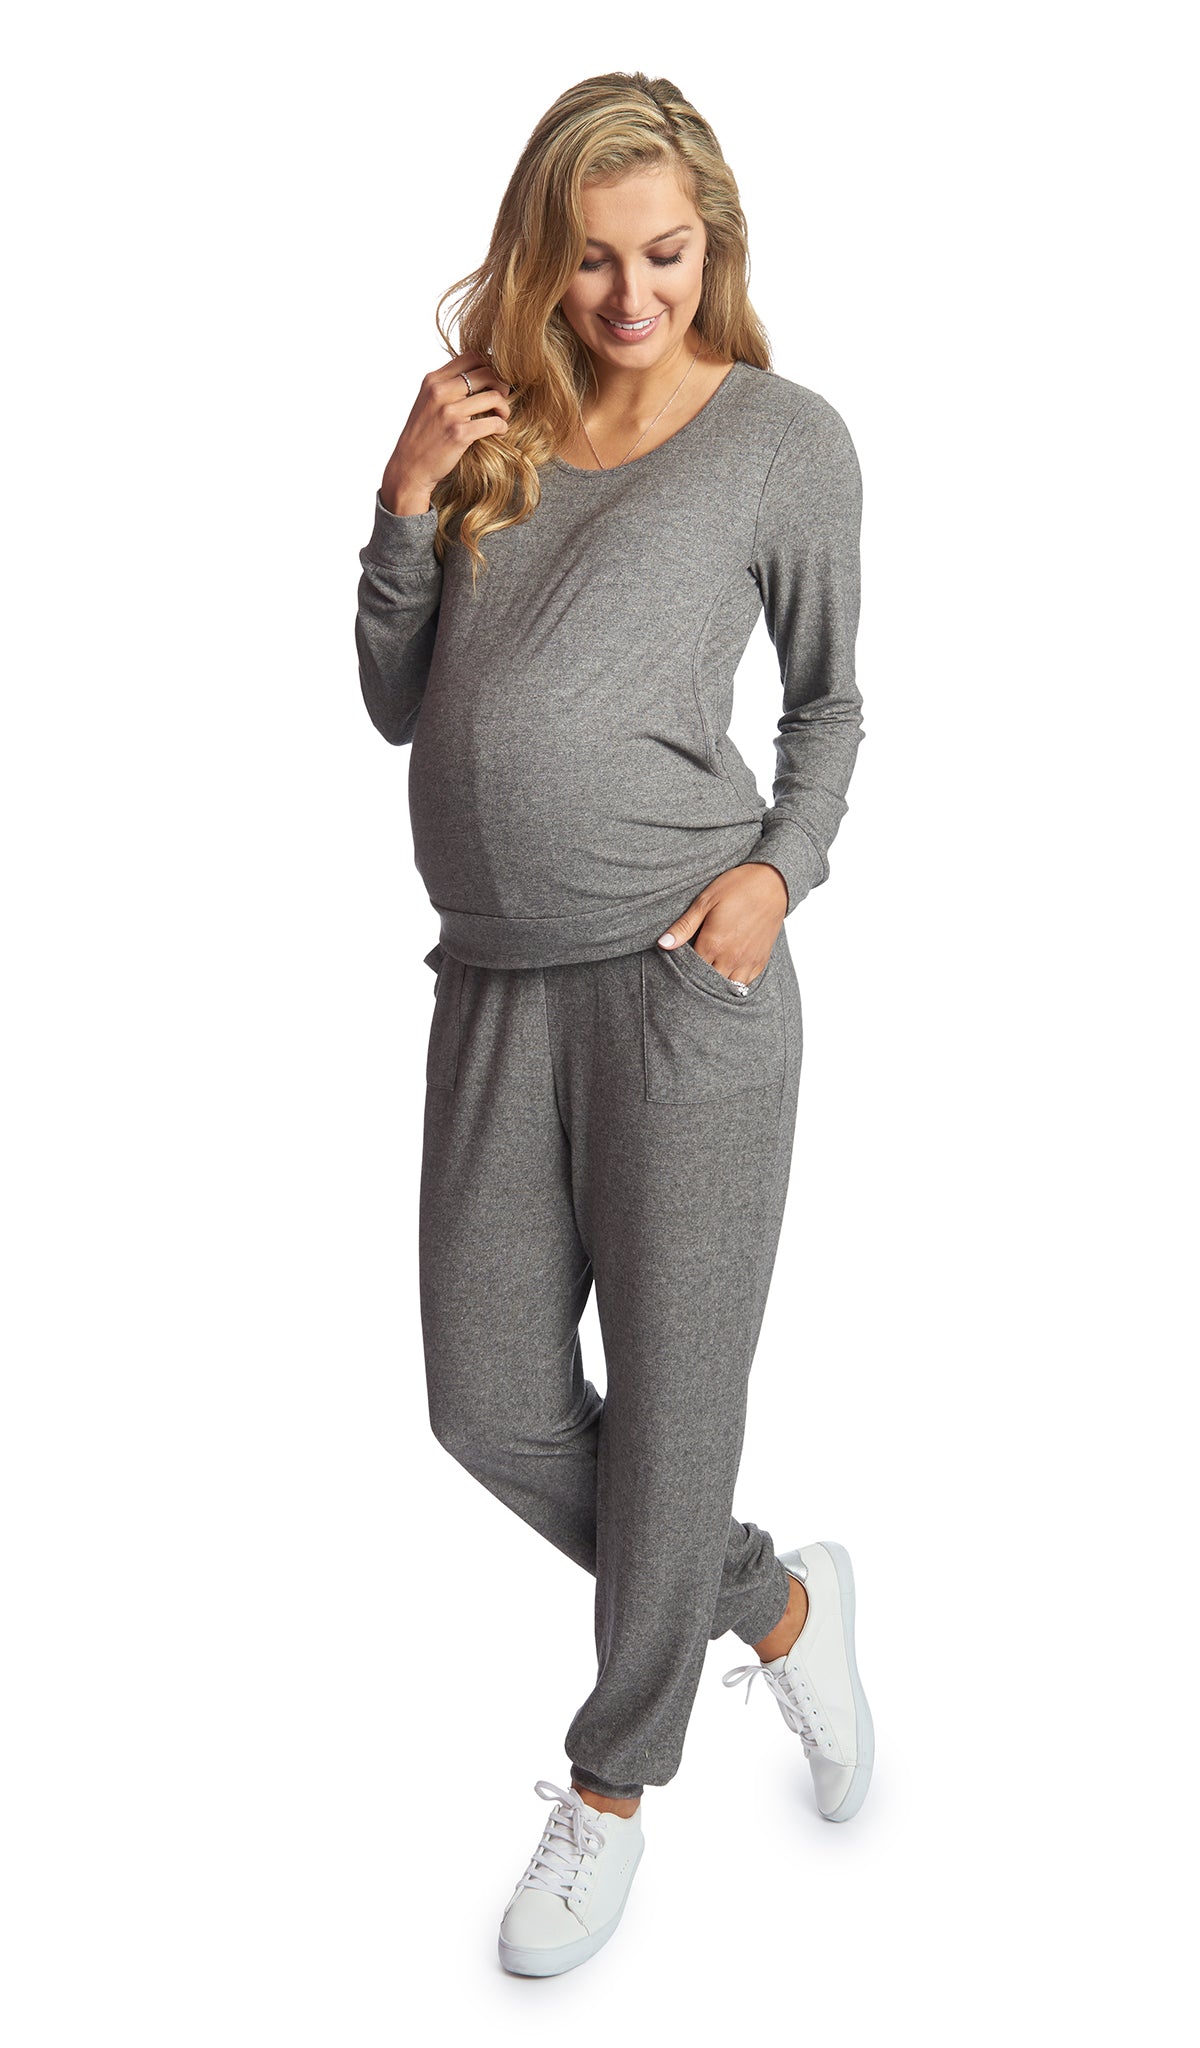 Charcoal Whitney 2-Piece on pregnant figure. Long sleeve top with nursing access and long pant with cuff hem.